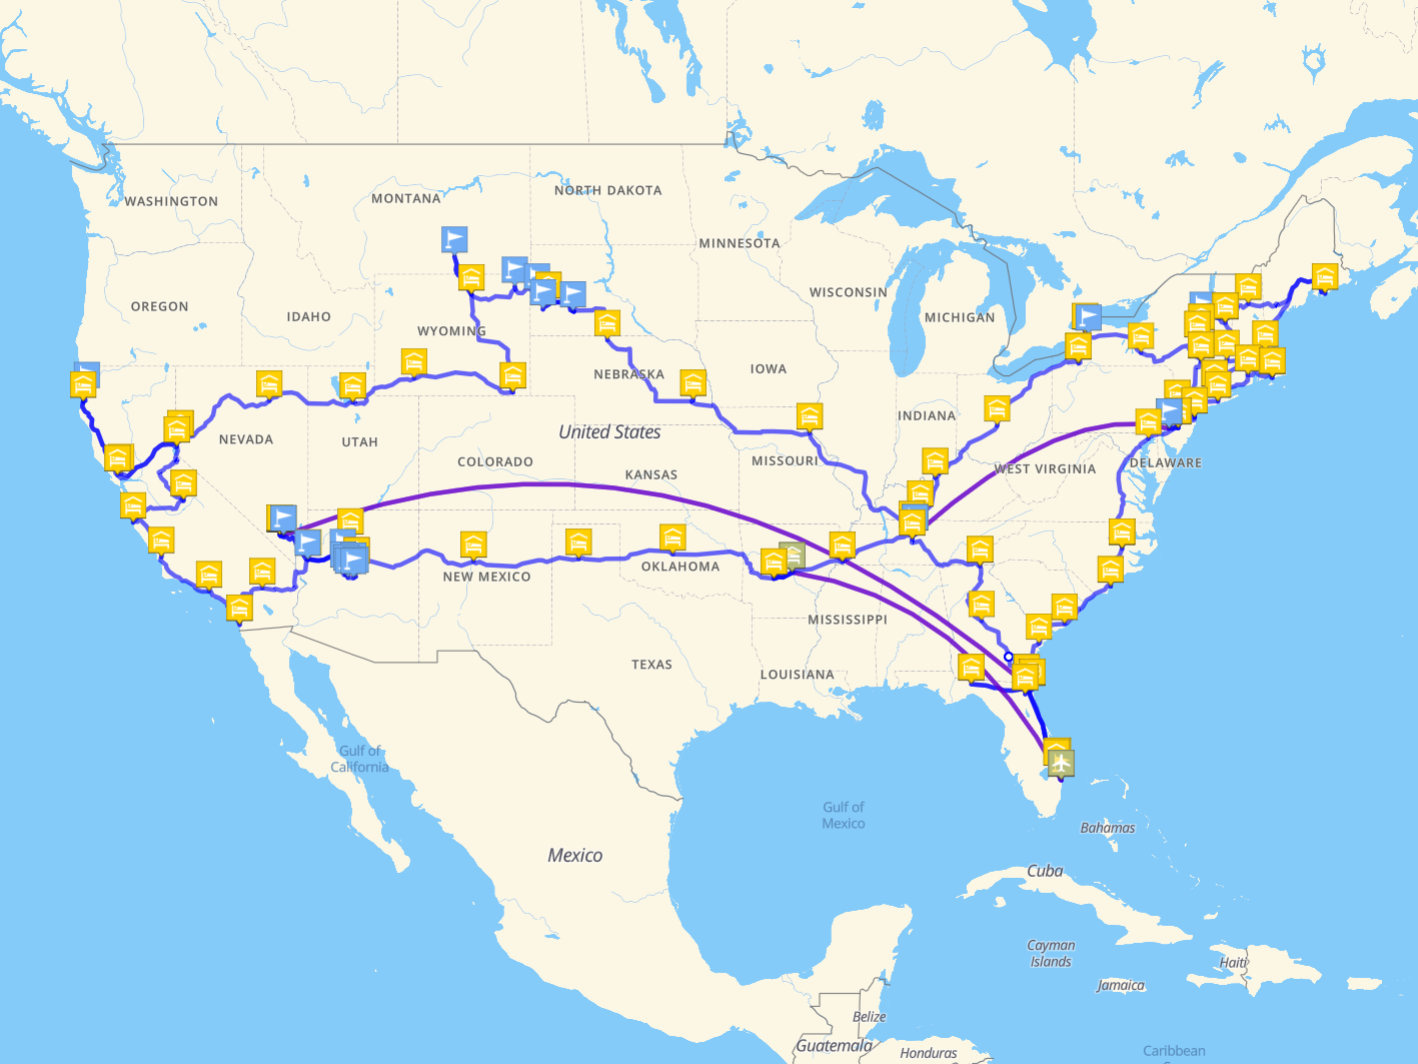 Map of lower 48 states, showing the winding route of our year-plus on the post-pandemic road. Square "bed" icons depict the places we overnighted; blue "flag" icons show side trips and veeeeerry specific routes which had to be plotted by hand, as it were, when the software didn't cooperate.